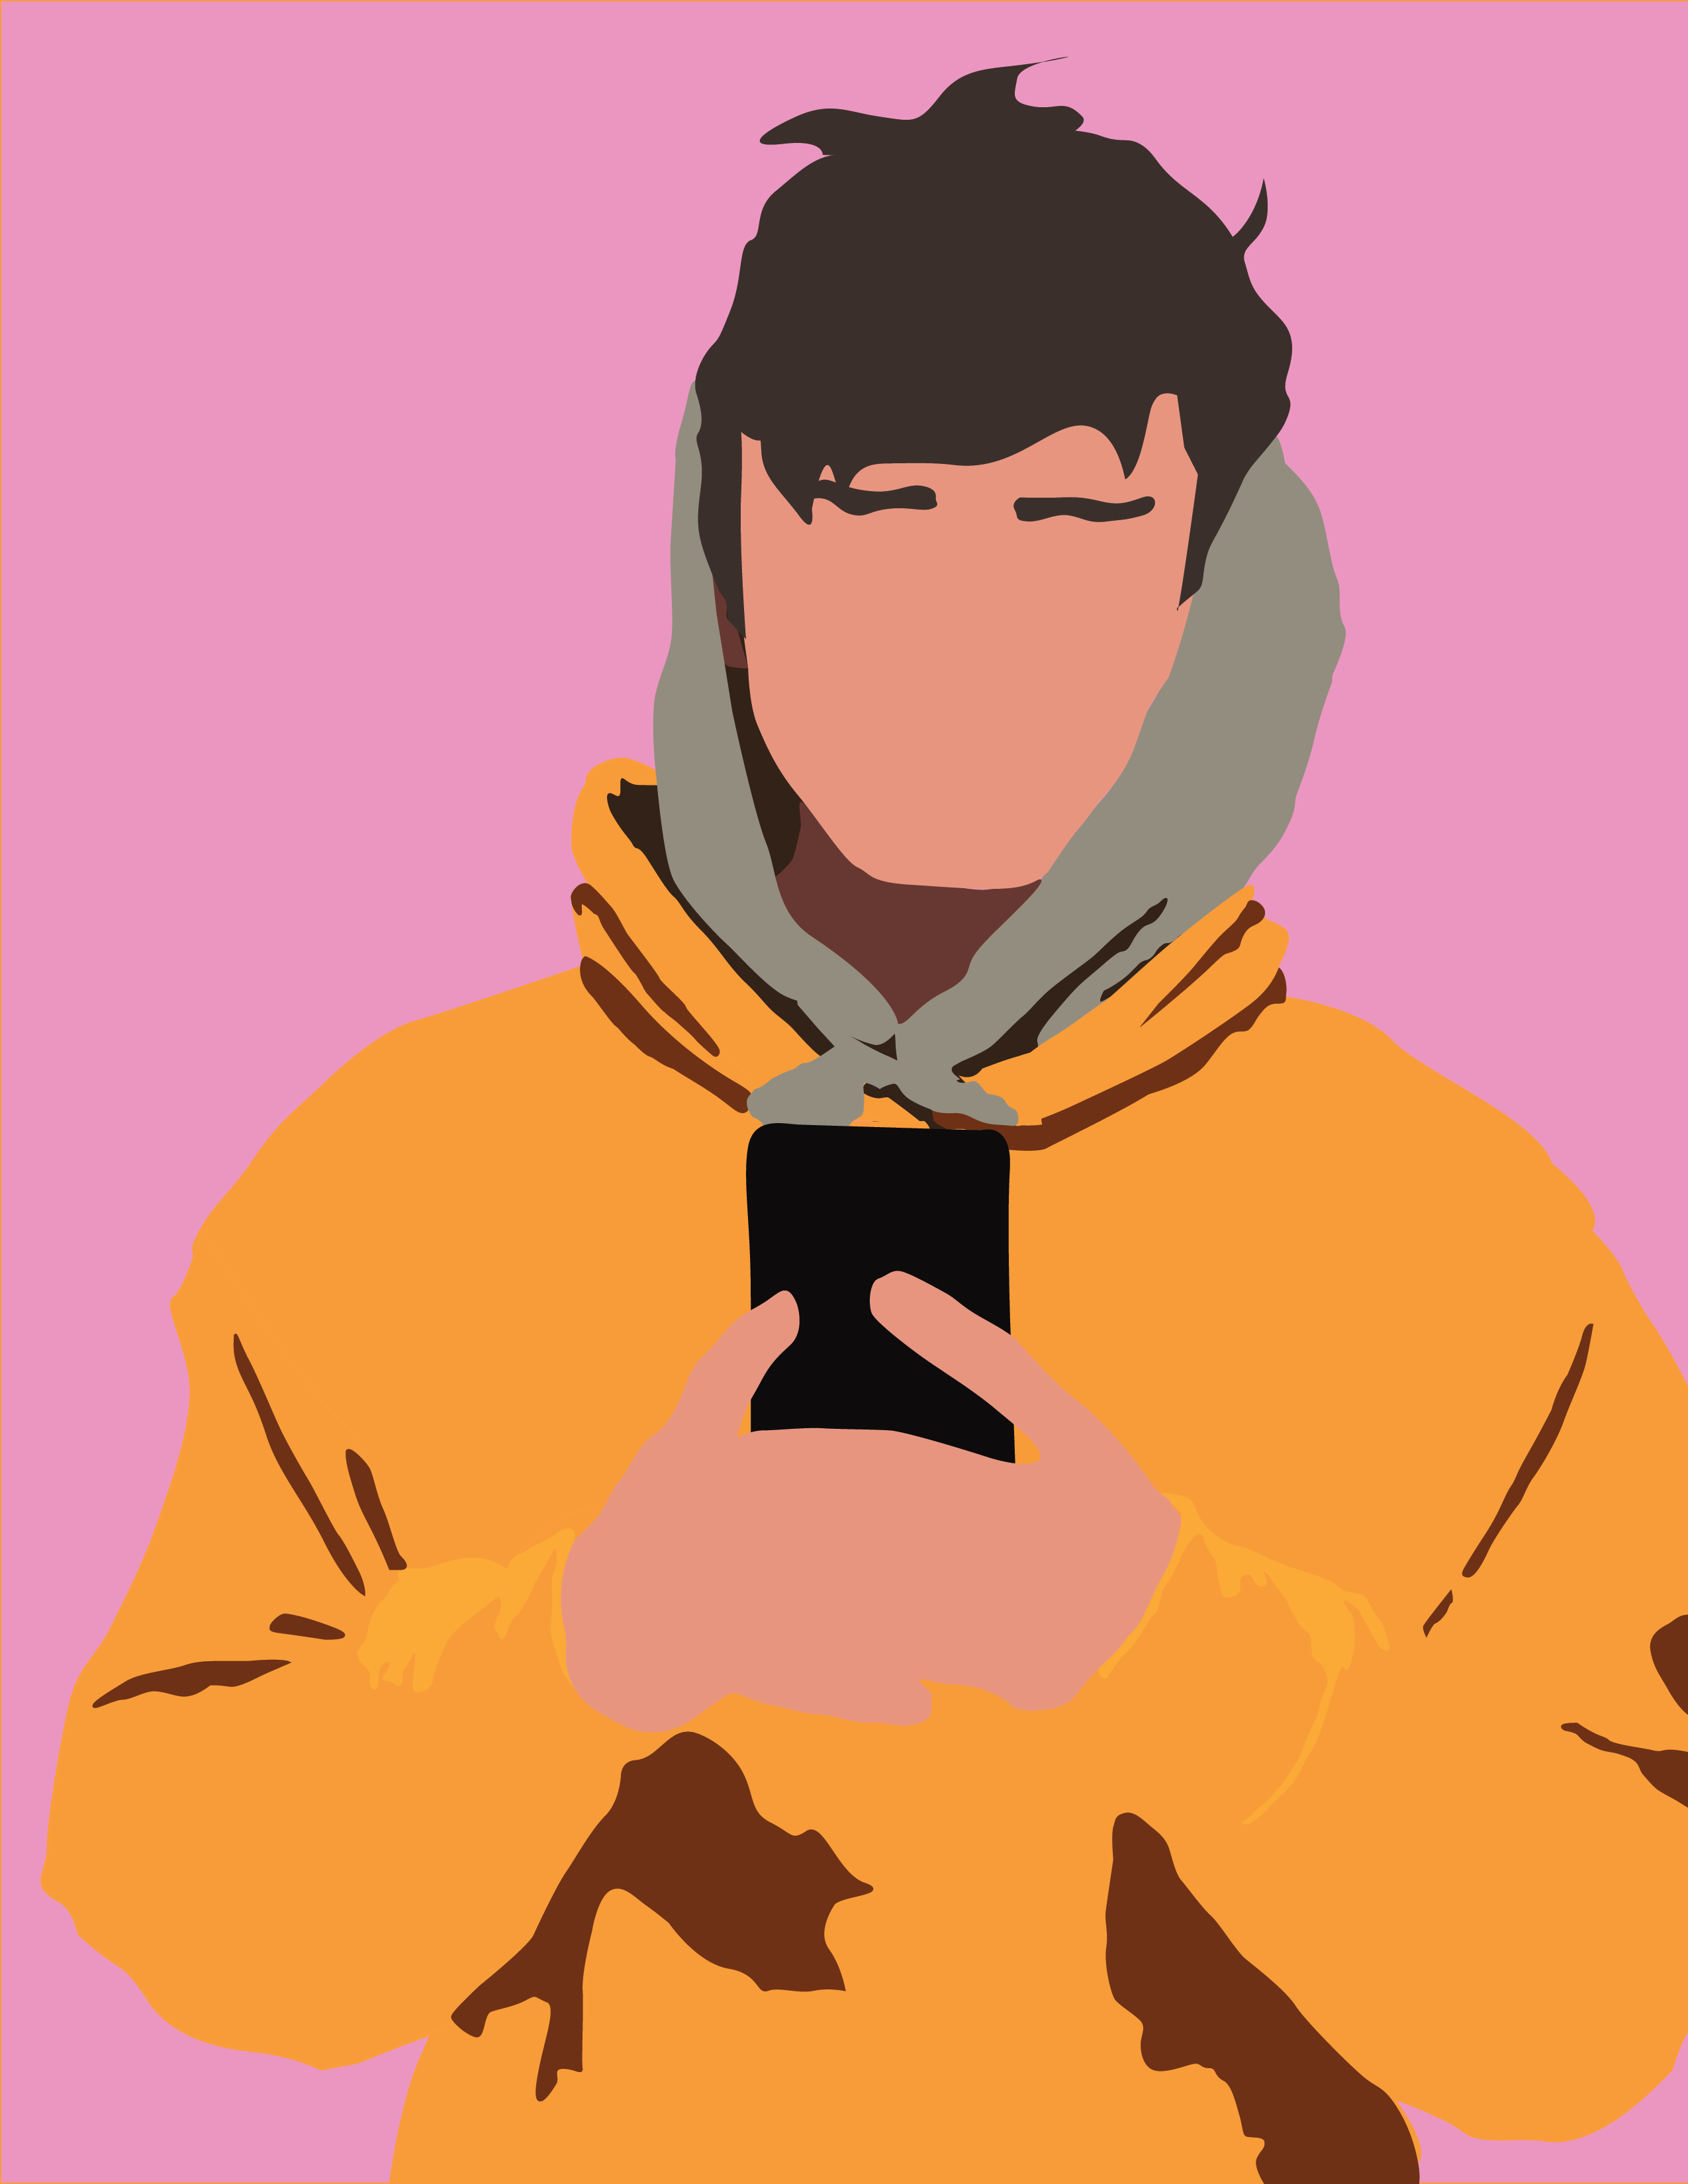 vector self-portrait of young man holding smartphone